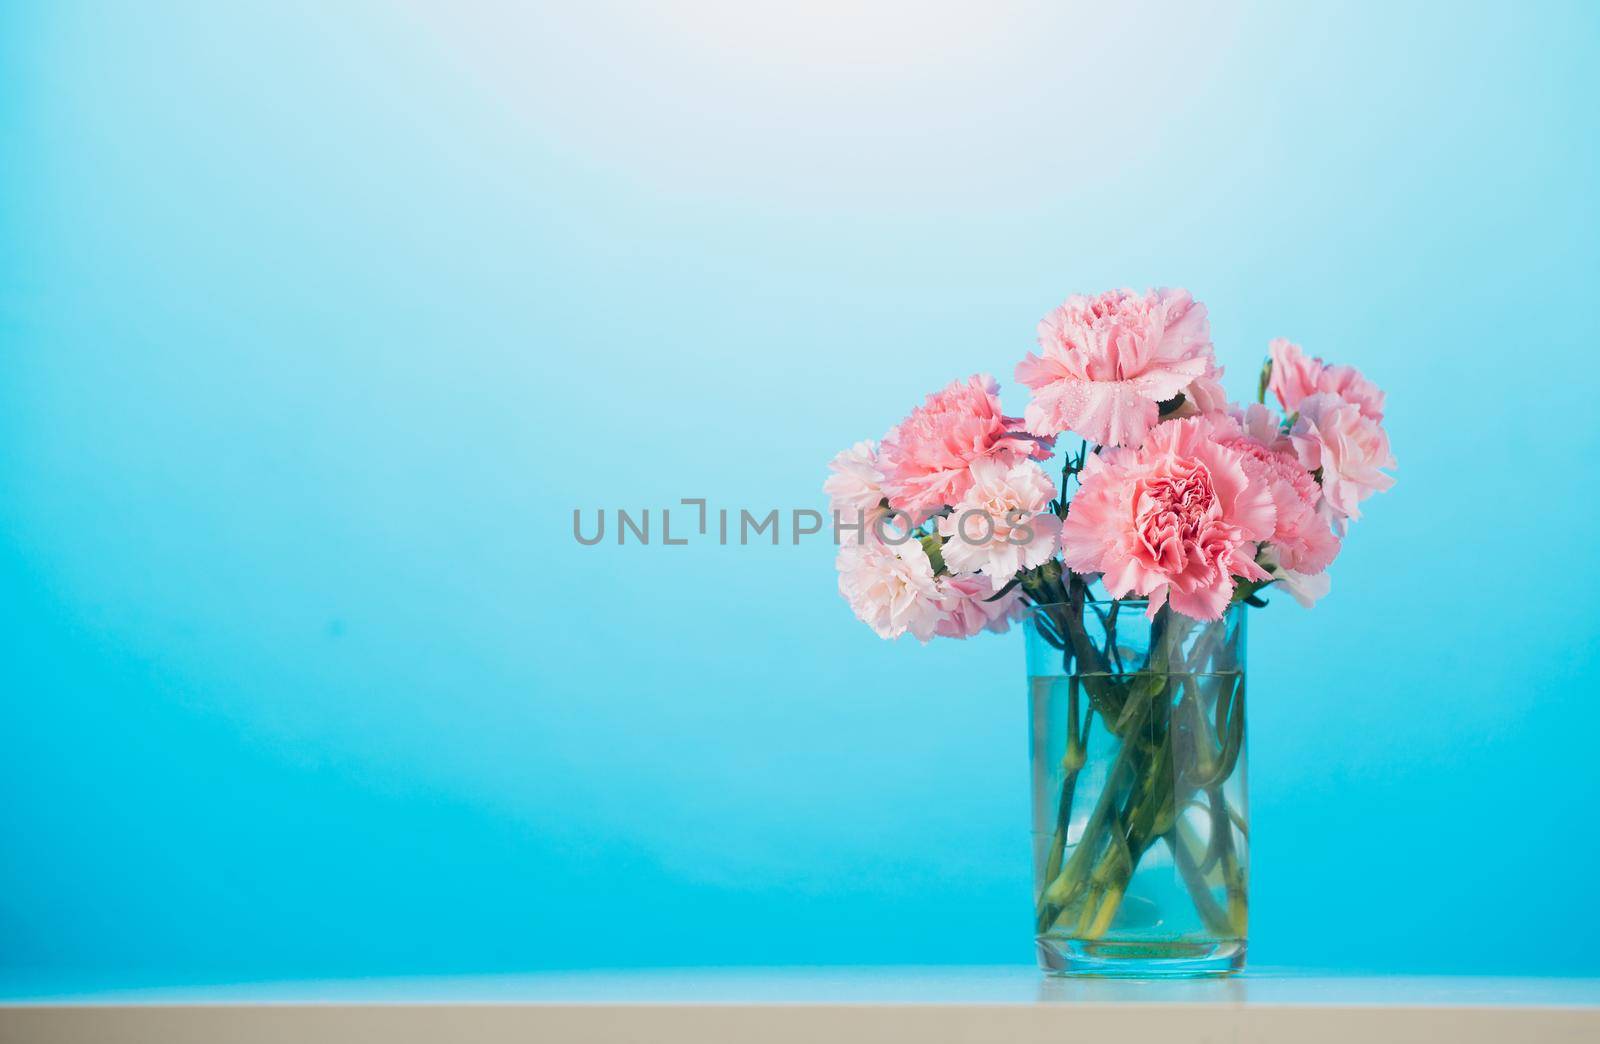 Carnation flowers on blue background by Wasant